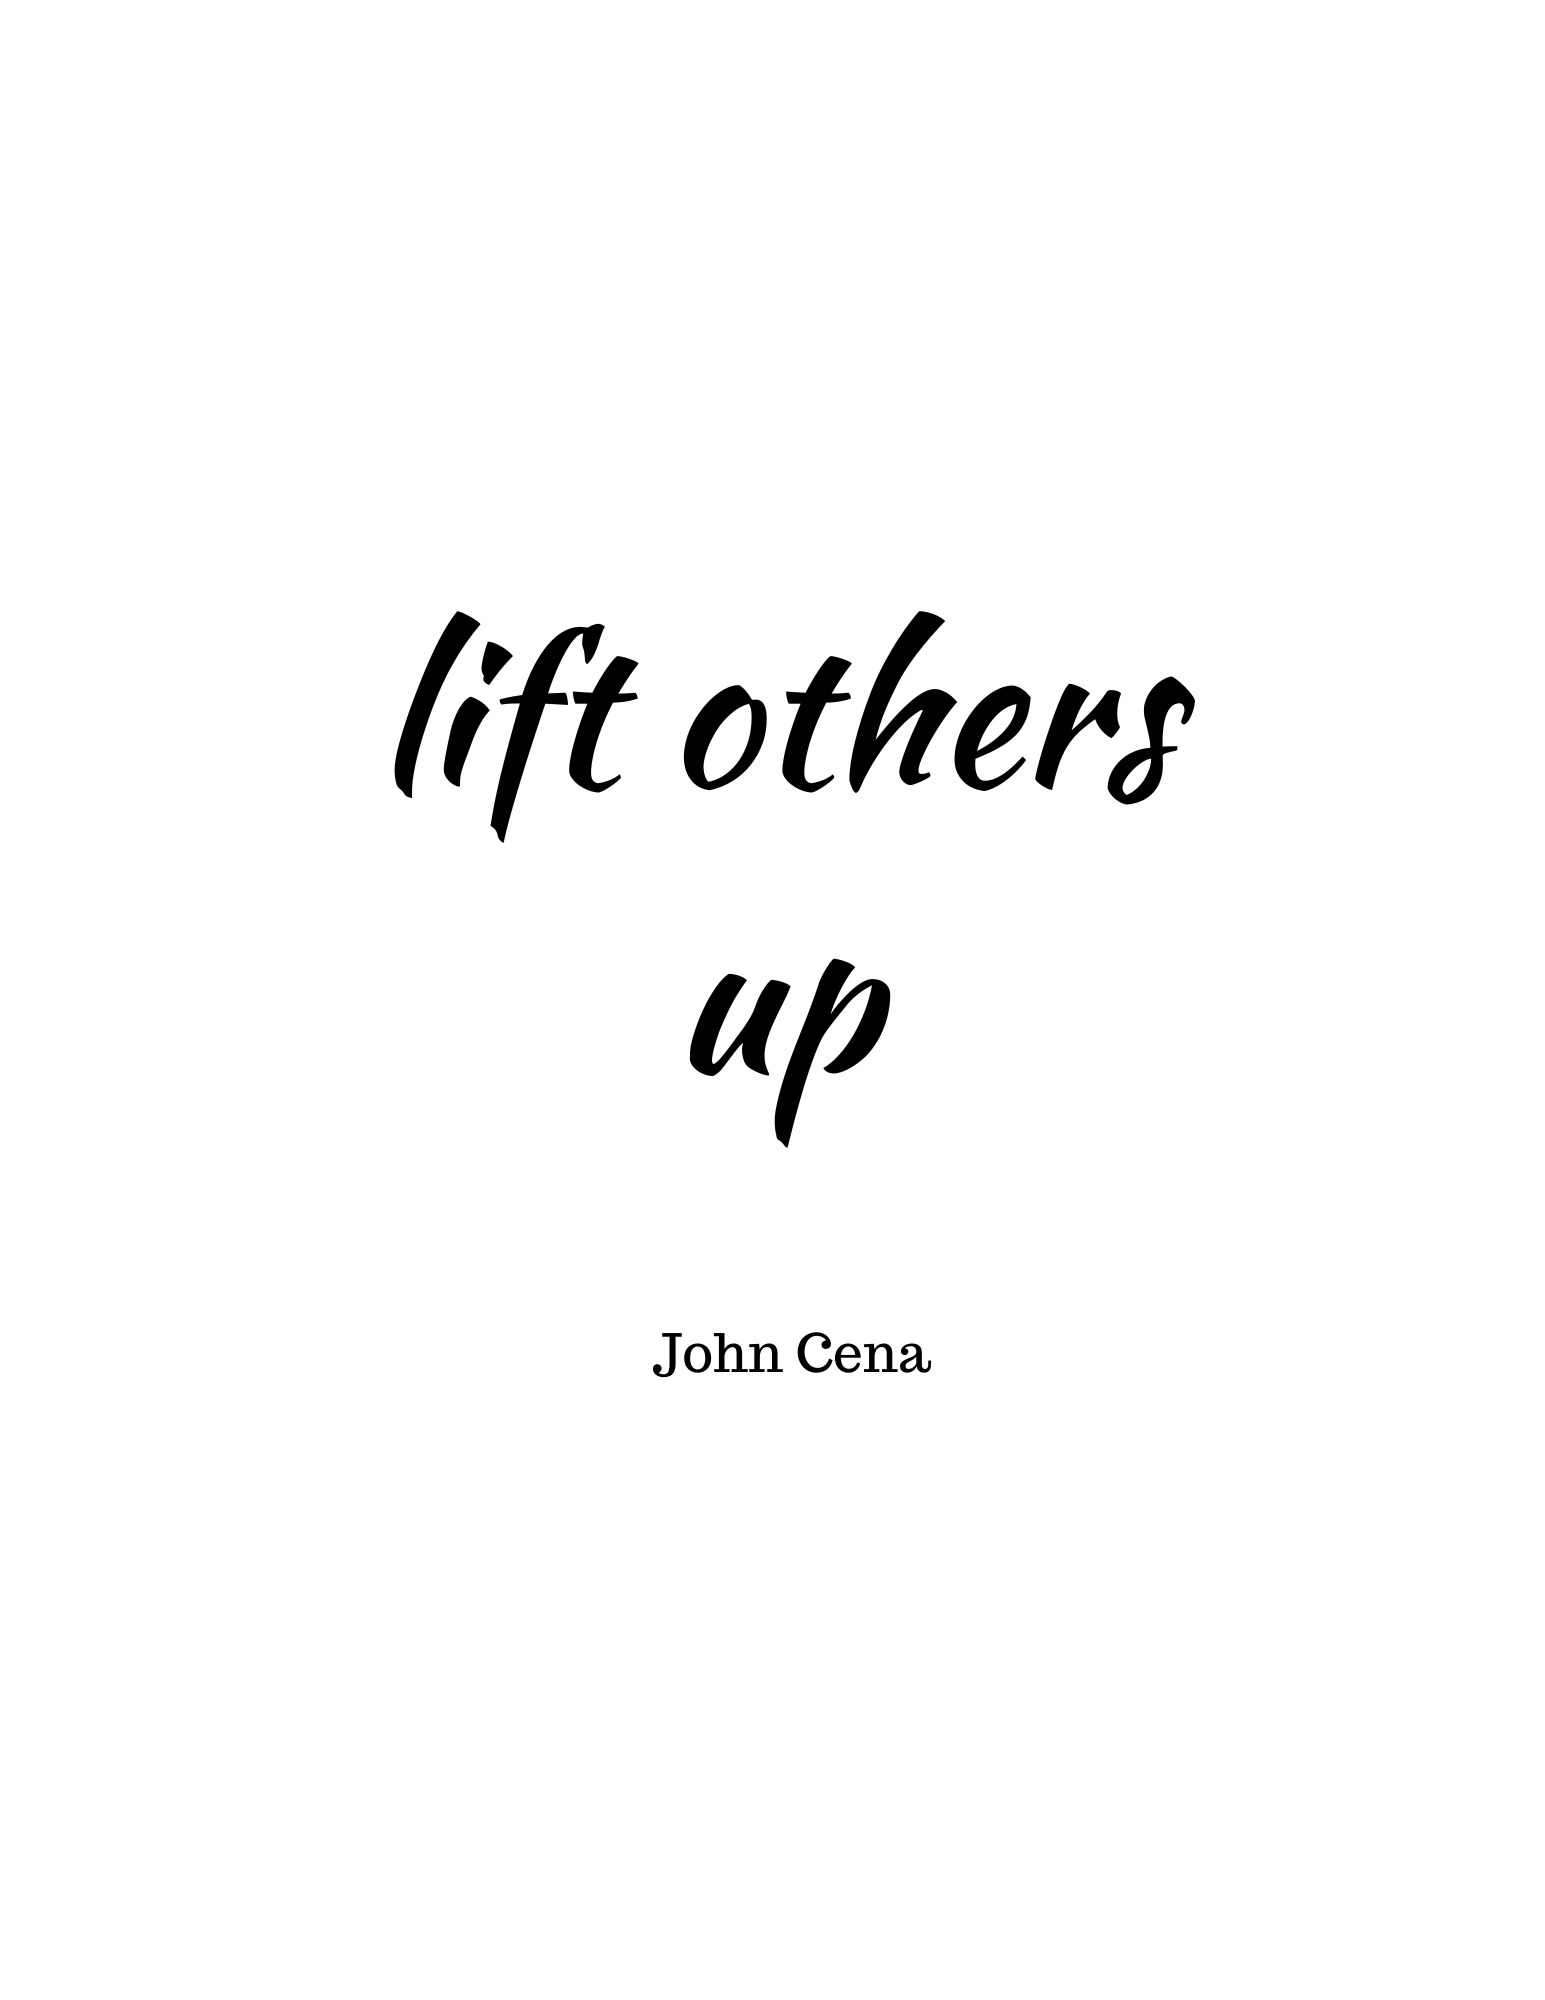 Lift others up - a short quote by John Cena 